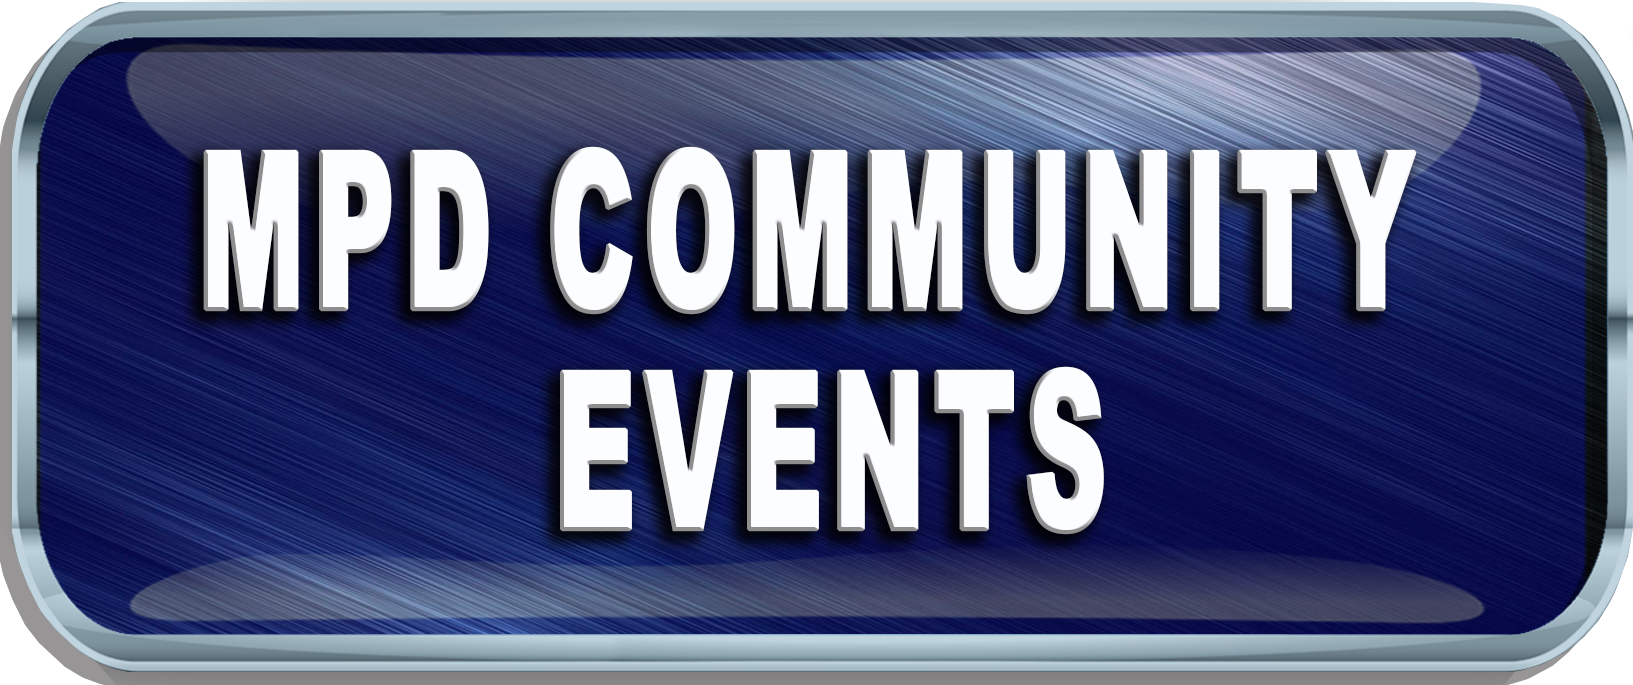 MPD Community Events